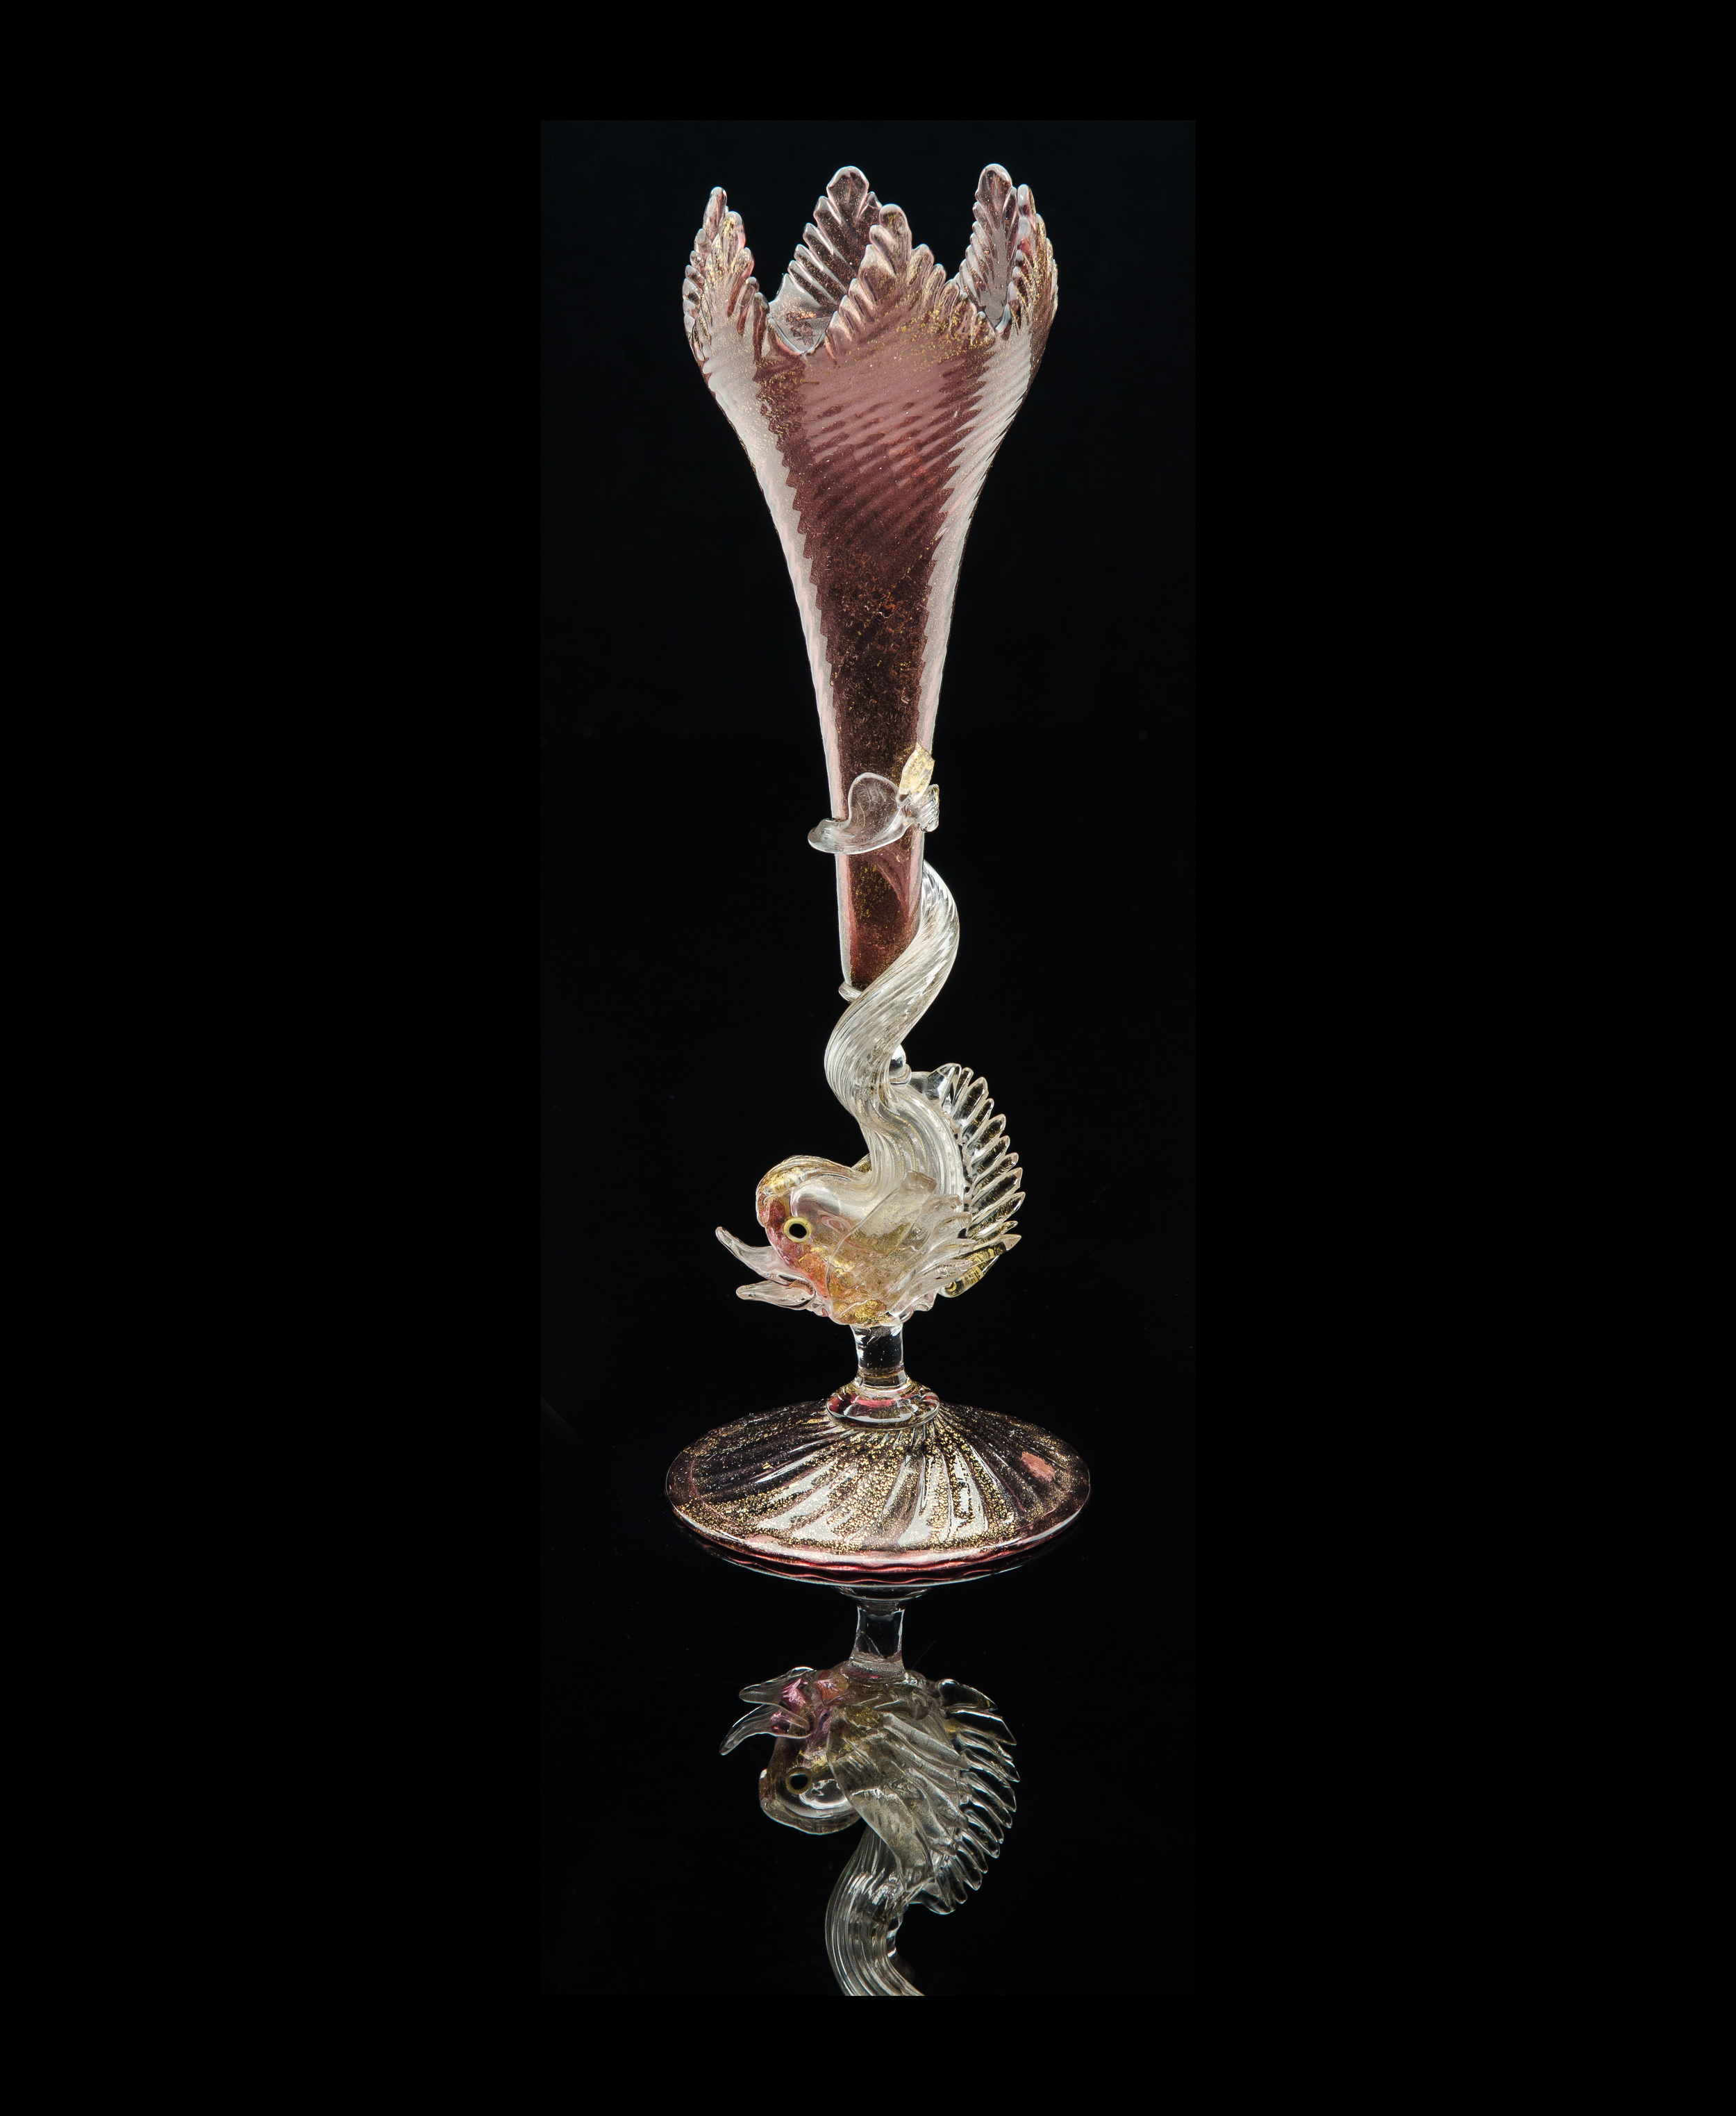  Salviati and Company,&nbsp; Maroon Tulip Form Vase with Dolphin Stem&nbsp; (glass, 12 1/4 inches), VV.341 